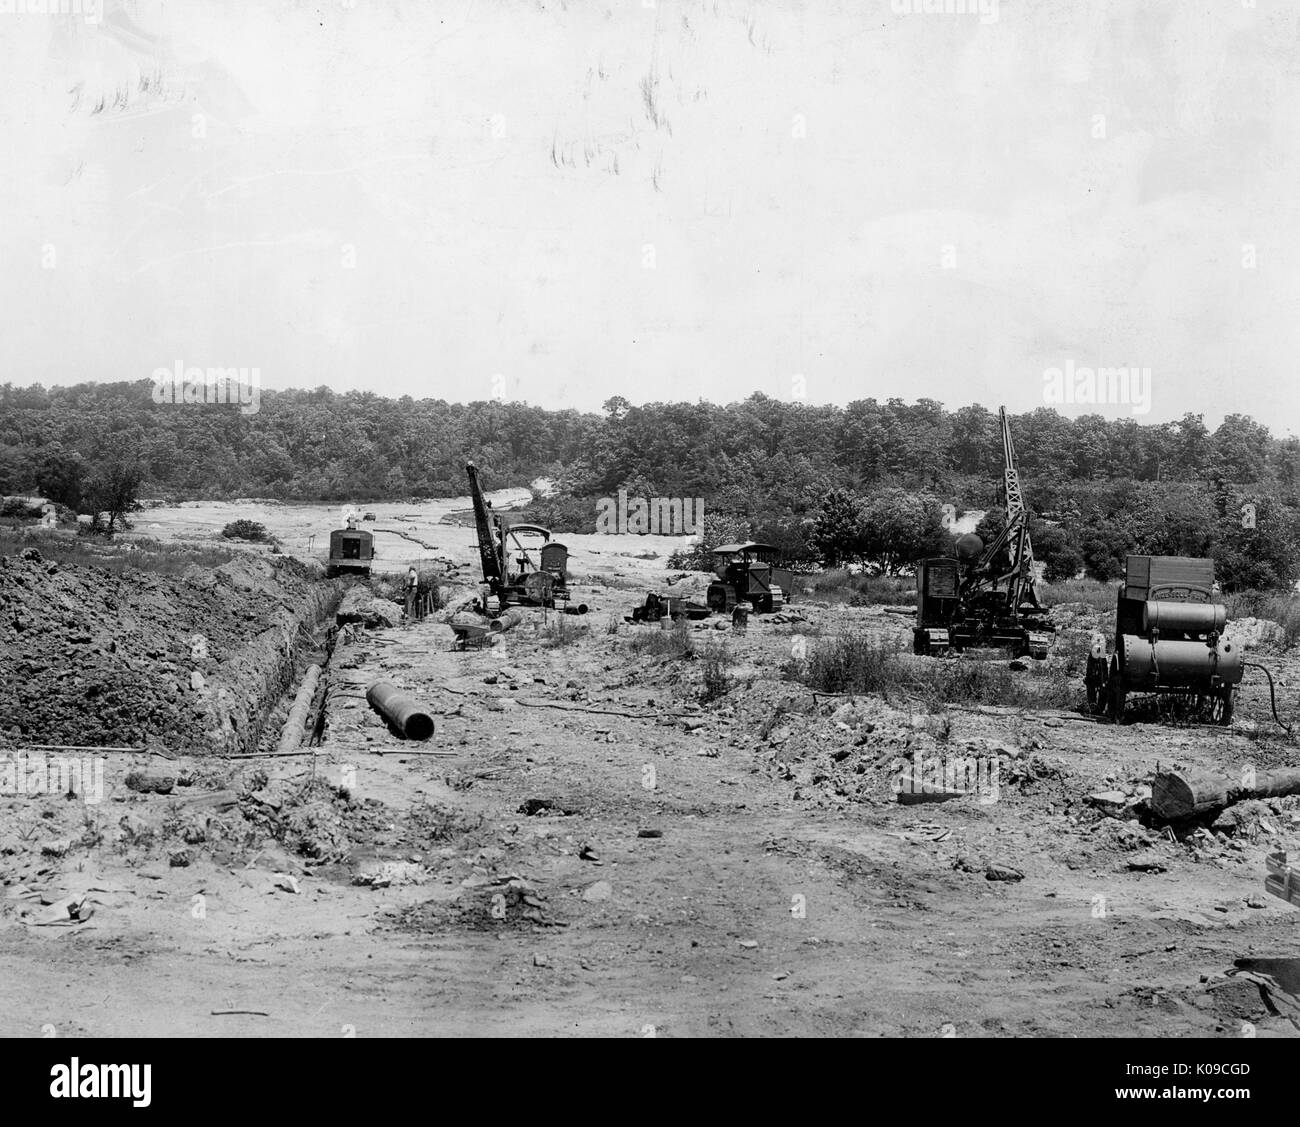 Landscape of Northwood land under construction, there are at least four different large pieces of construction equipment on the site and trees border the background, United States, 1950. Stock Photo